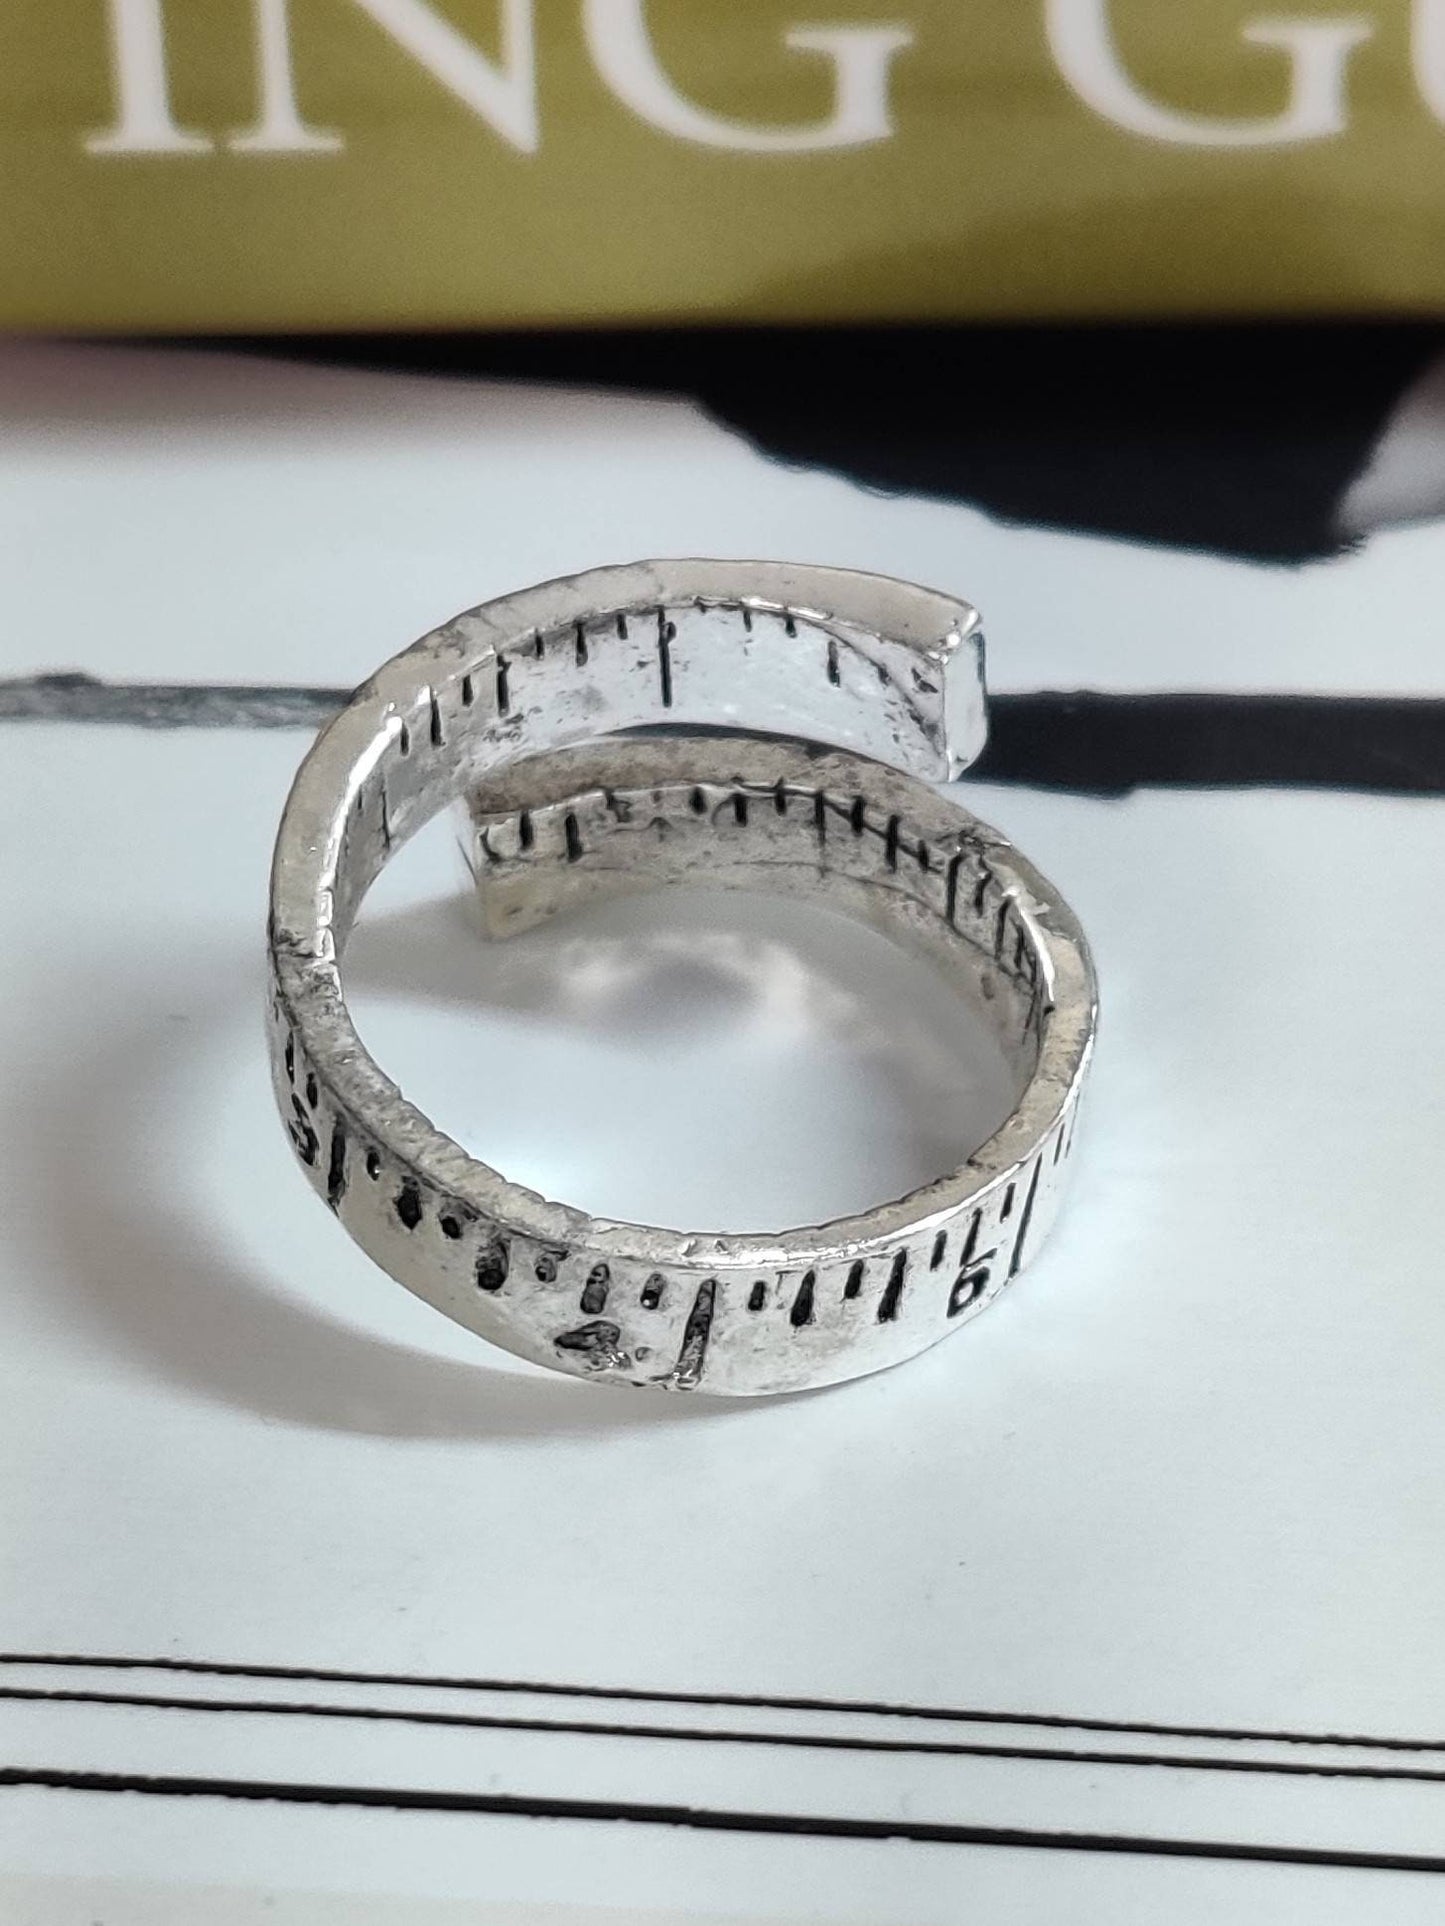 Sewing Theme Rings: Measuring Tape, Safety Pin and Zippers